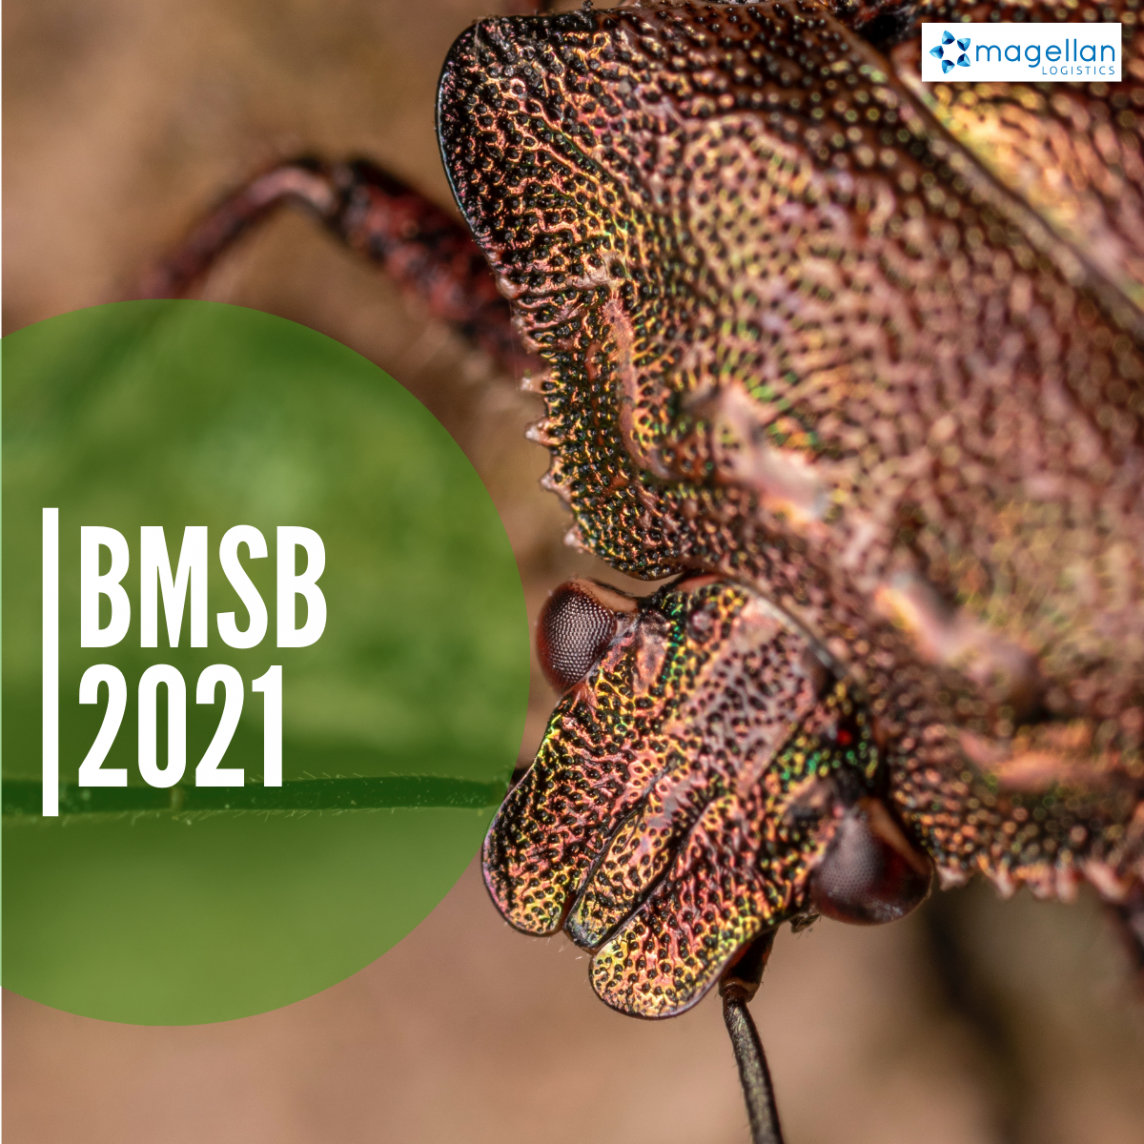 Brown Marmorated Stink Bugs 2021